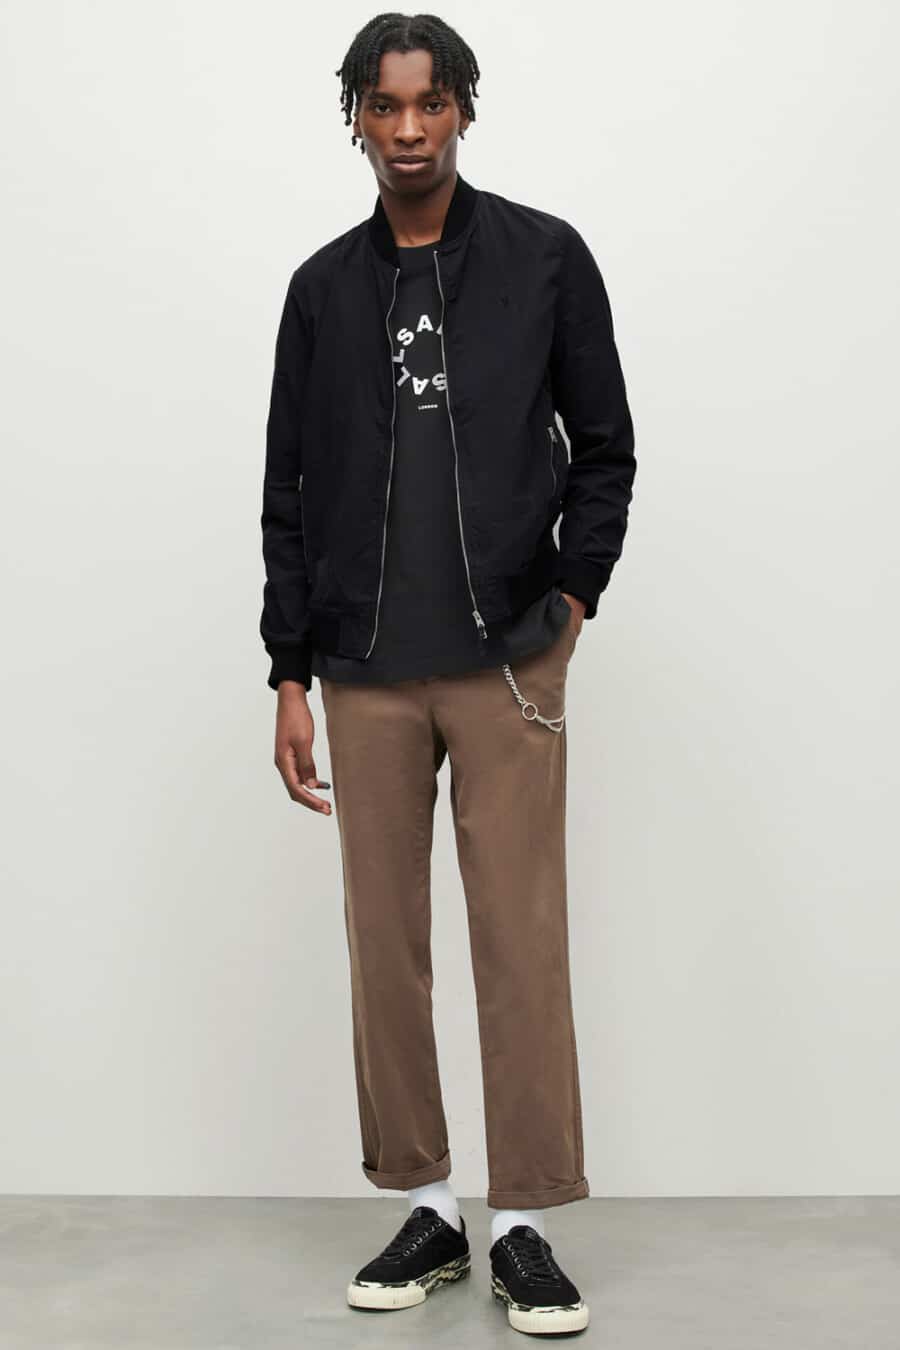 Men's brown pants, black print T-shirt, black bomber jacket, silver wallet chain and black canvas sneakers outfit